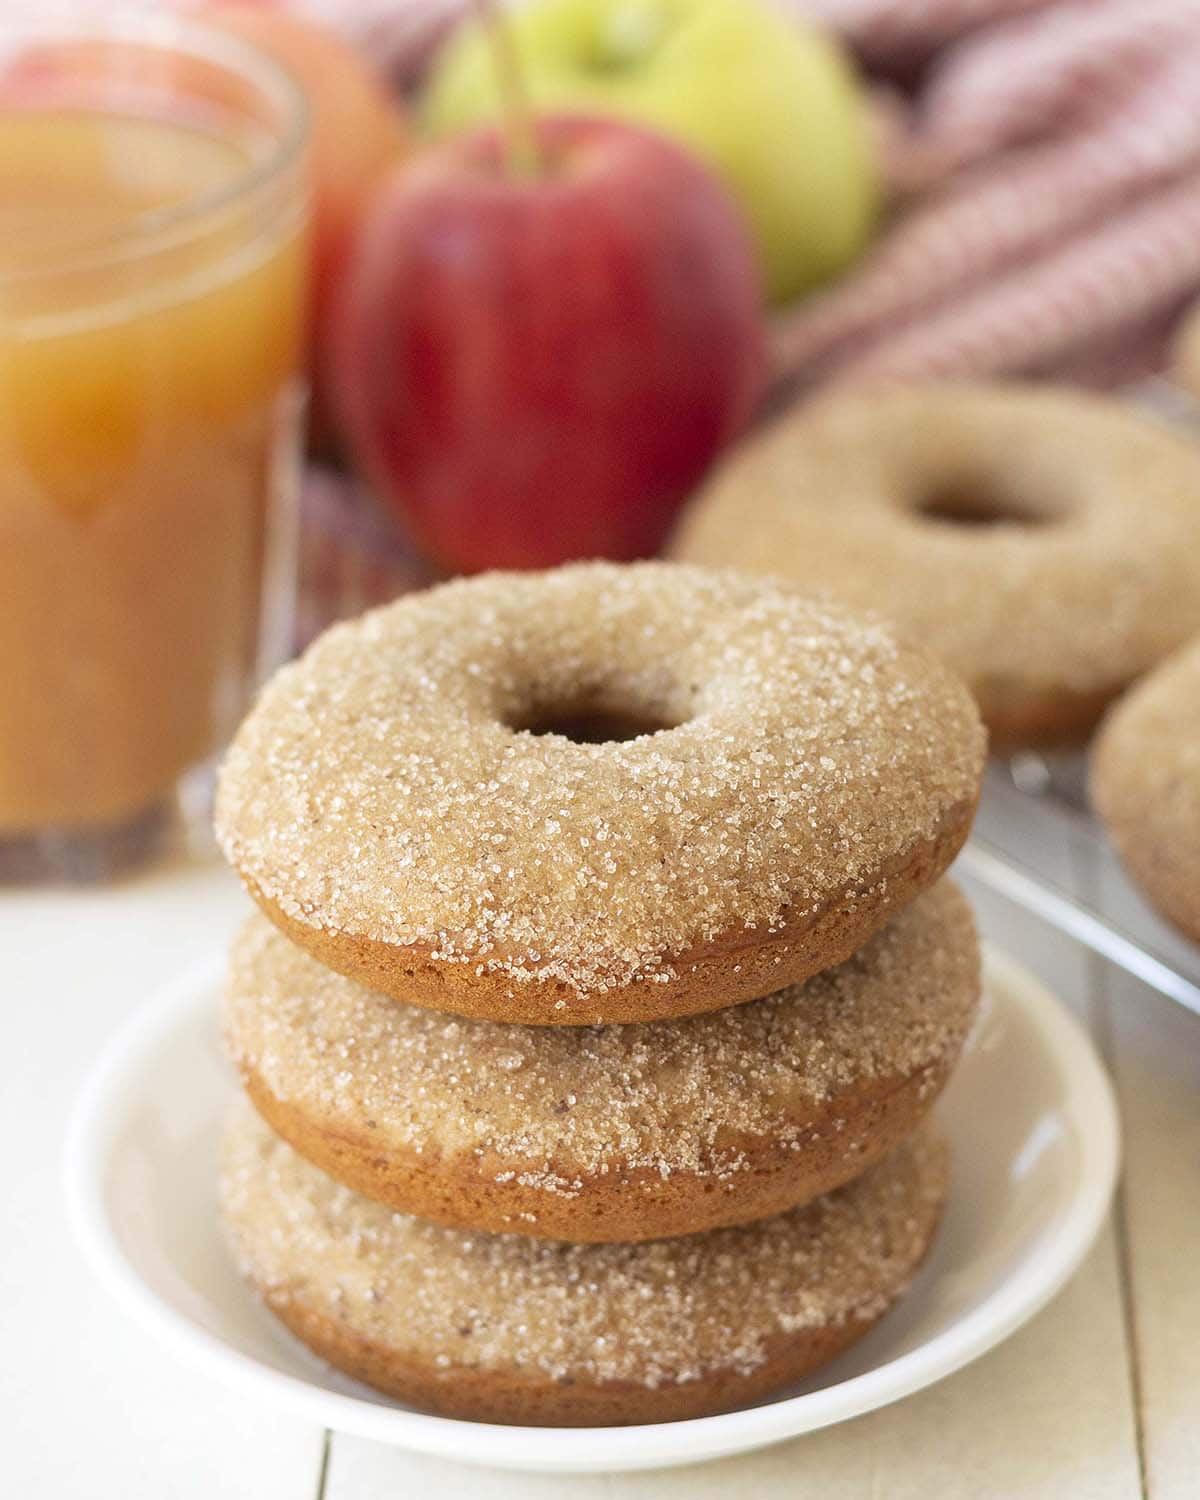 Three dairy free apple cider donuts stacked on top of each other, fresh apples and more donuts sit in the background.